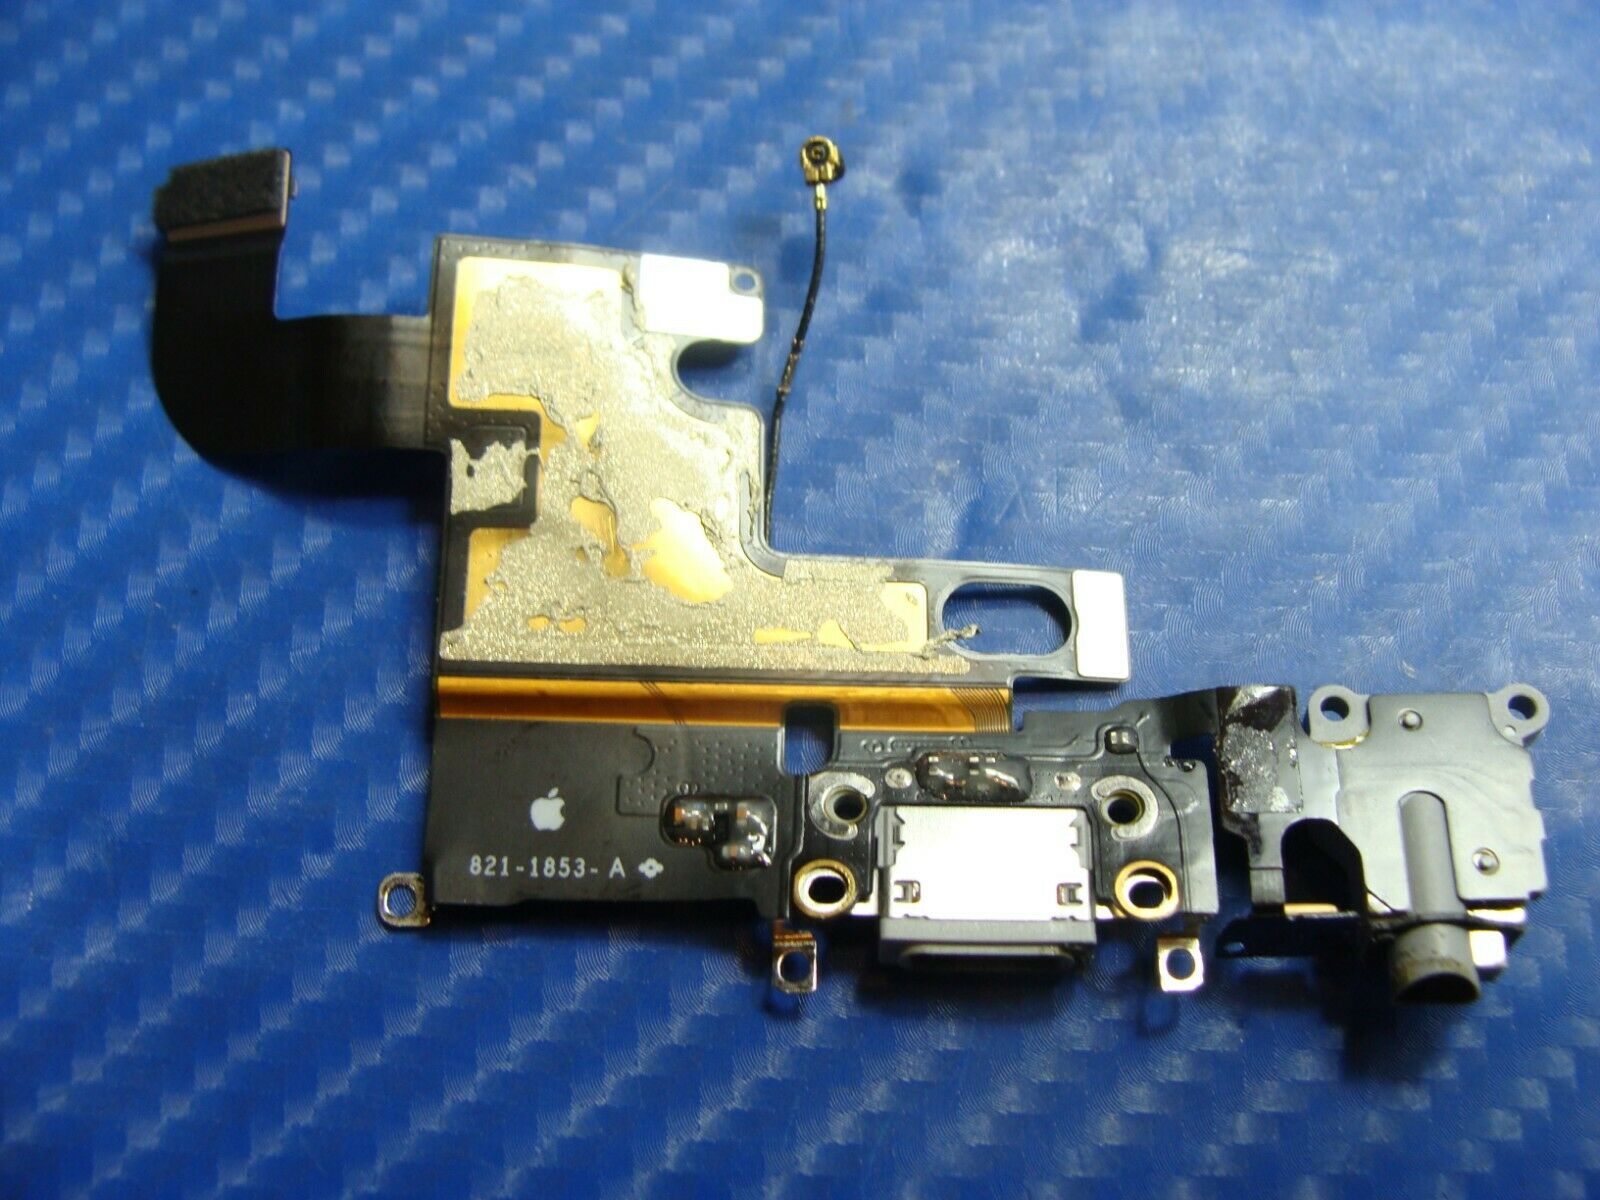 iPhone 6 Verizon A1549 4.7" 2014 MG632LL/A Genuine Dock Connector Assembly Apple